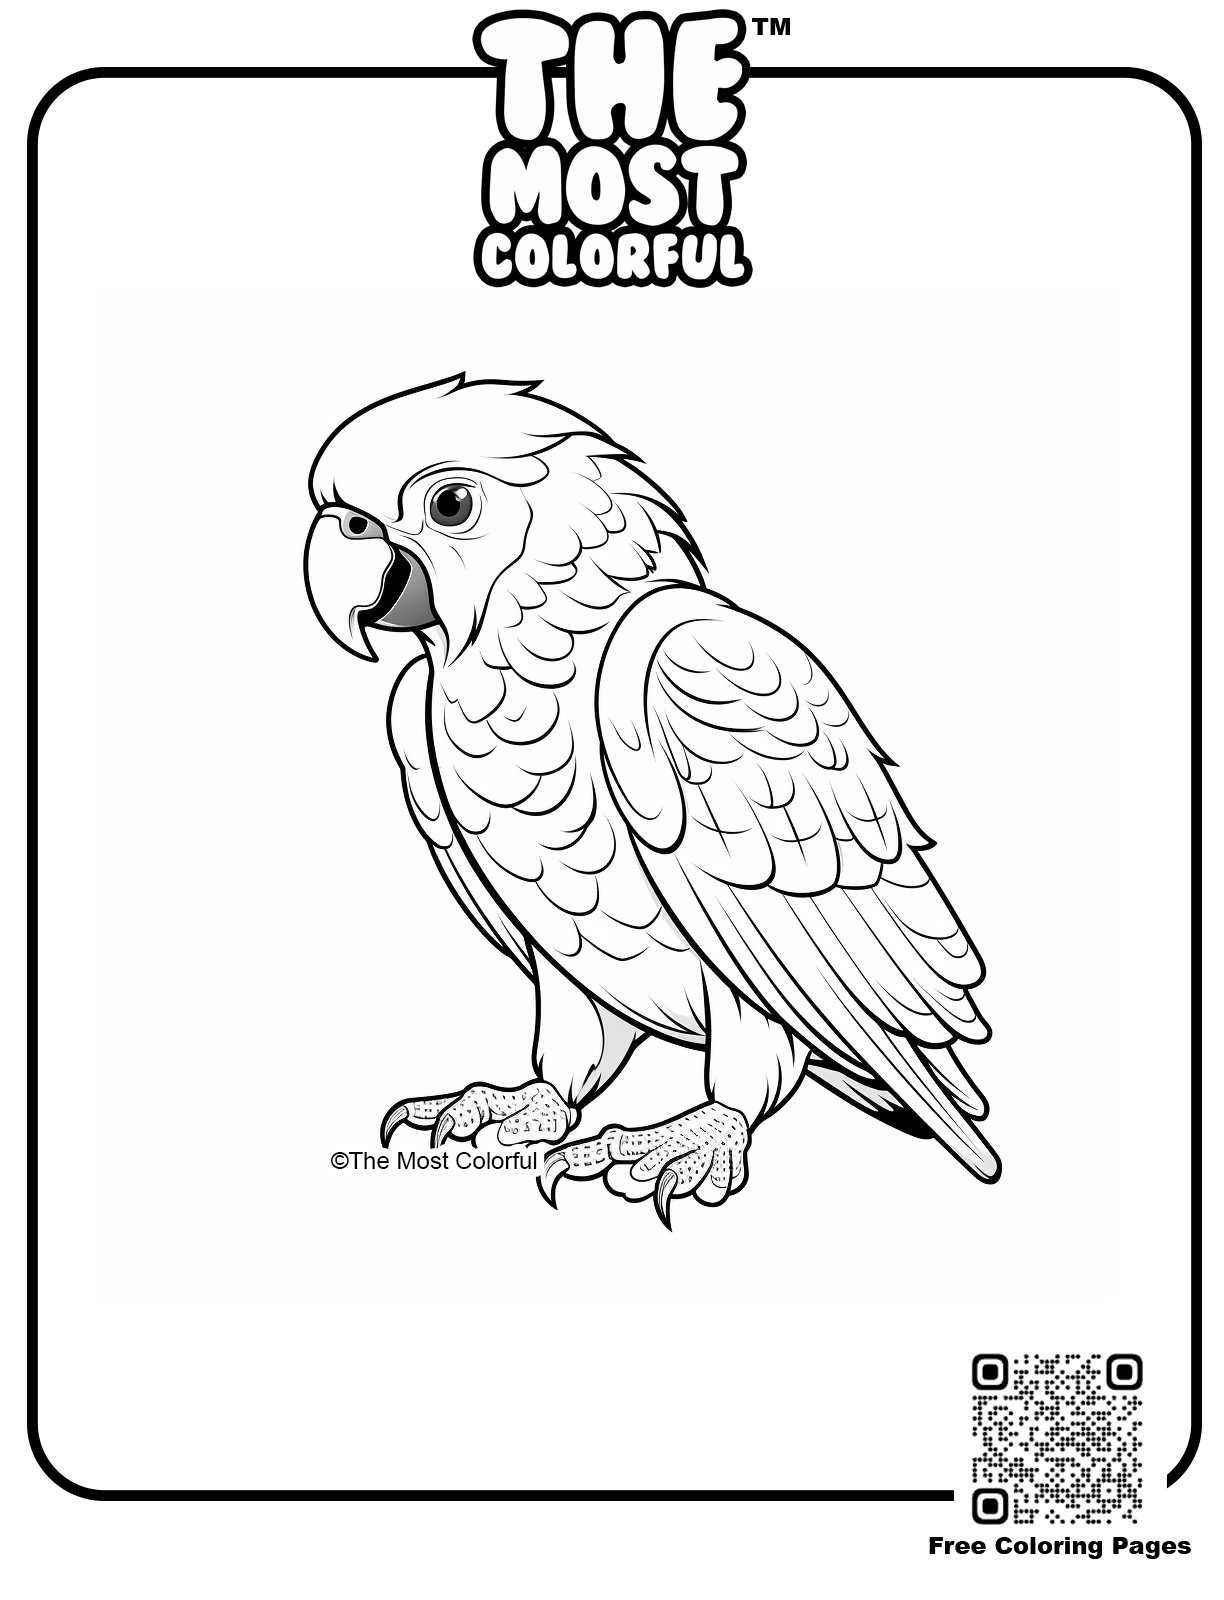 Parrot V2 Coloring Page for Kids - The Most Colorful™